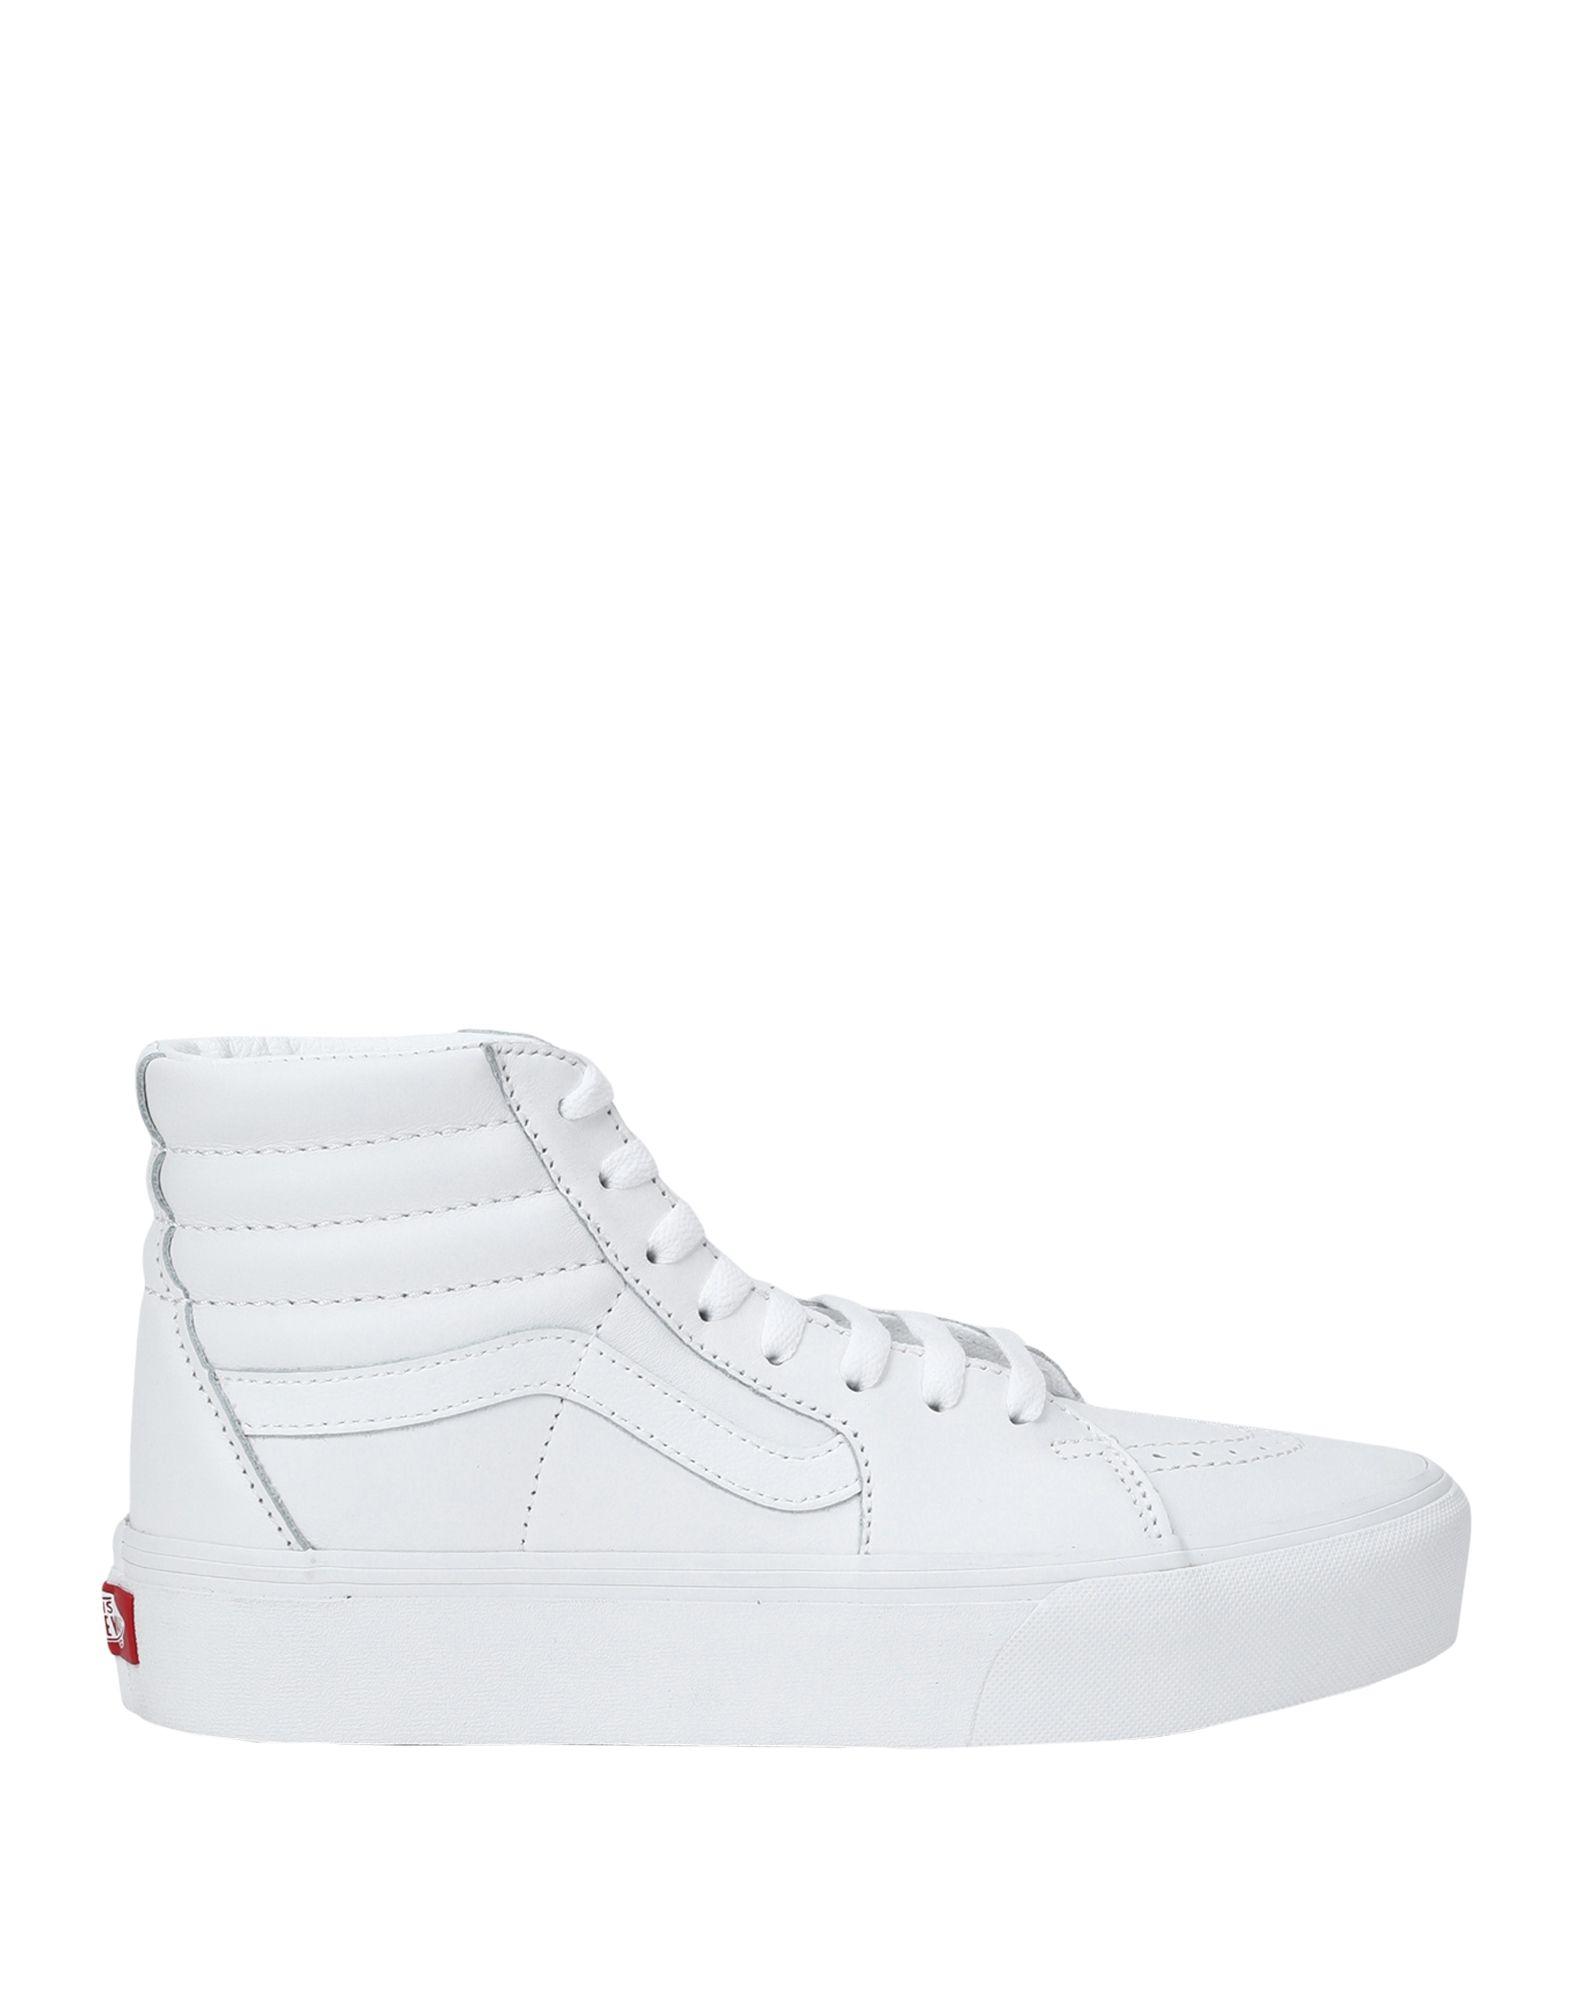 Vans Leather High-tops & Sneakers in White - Lyst